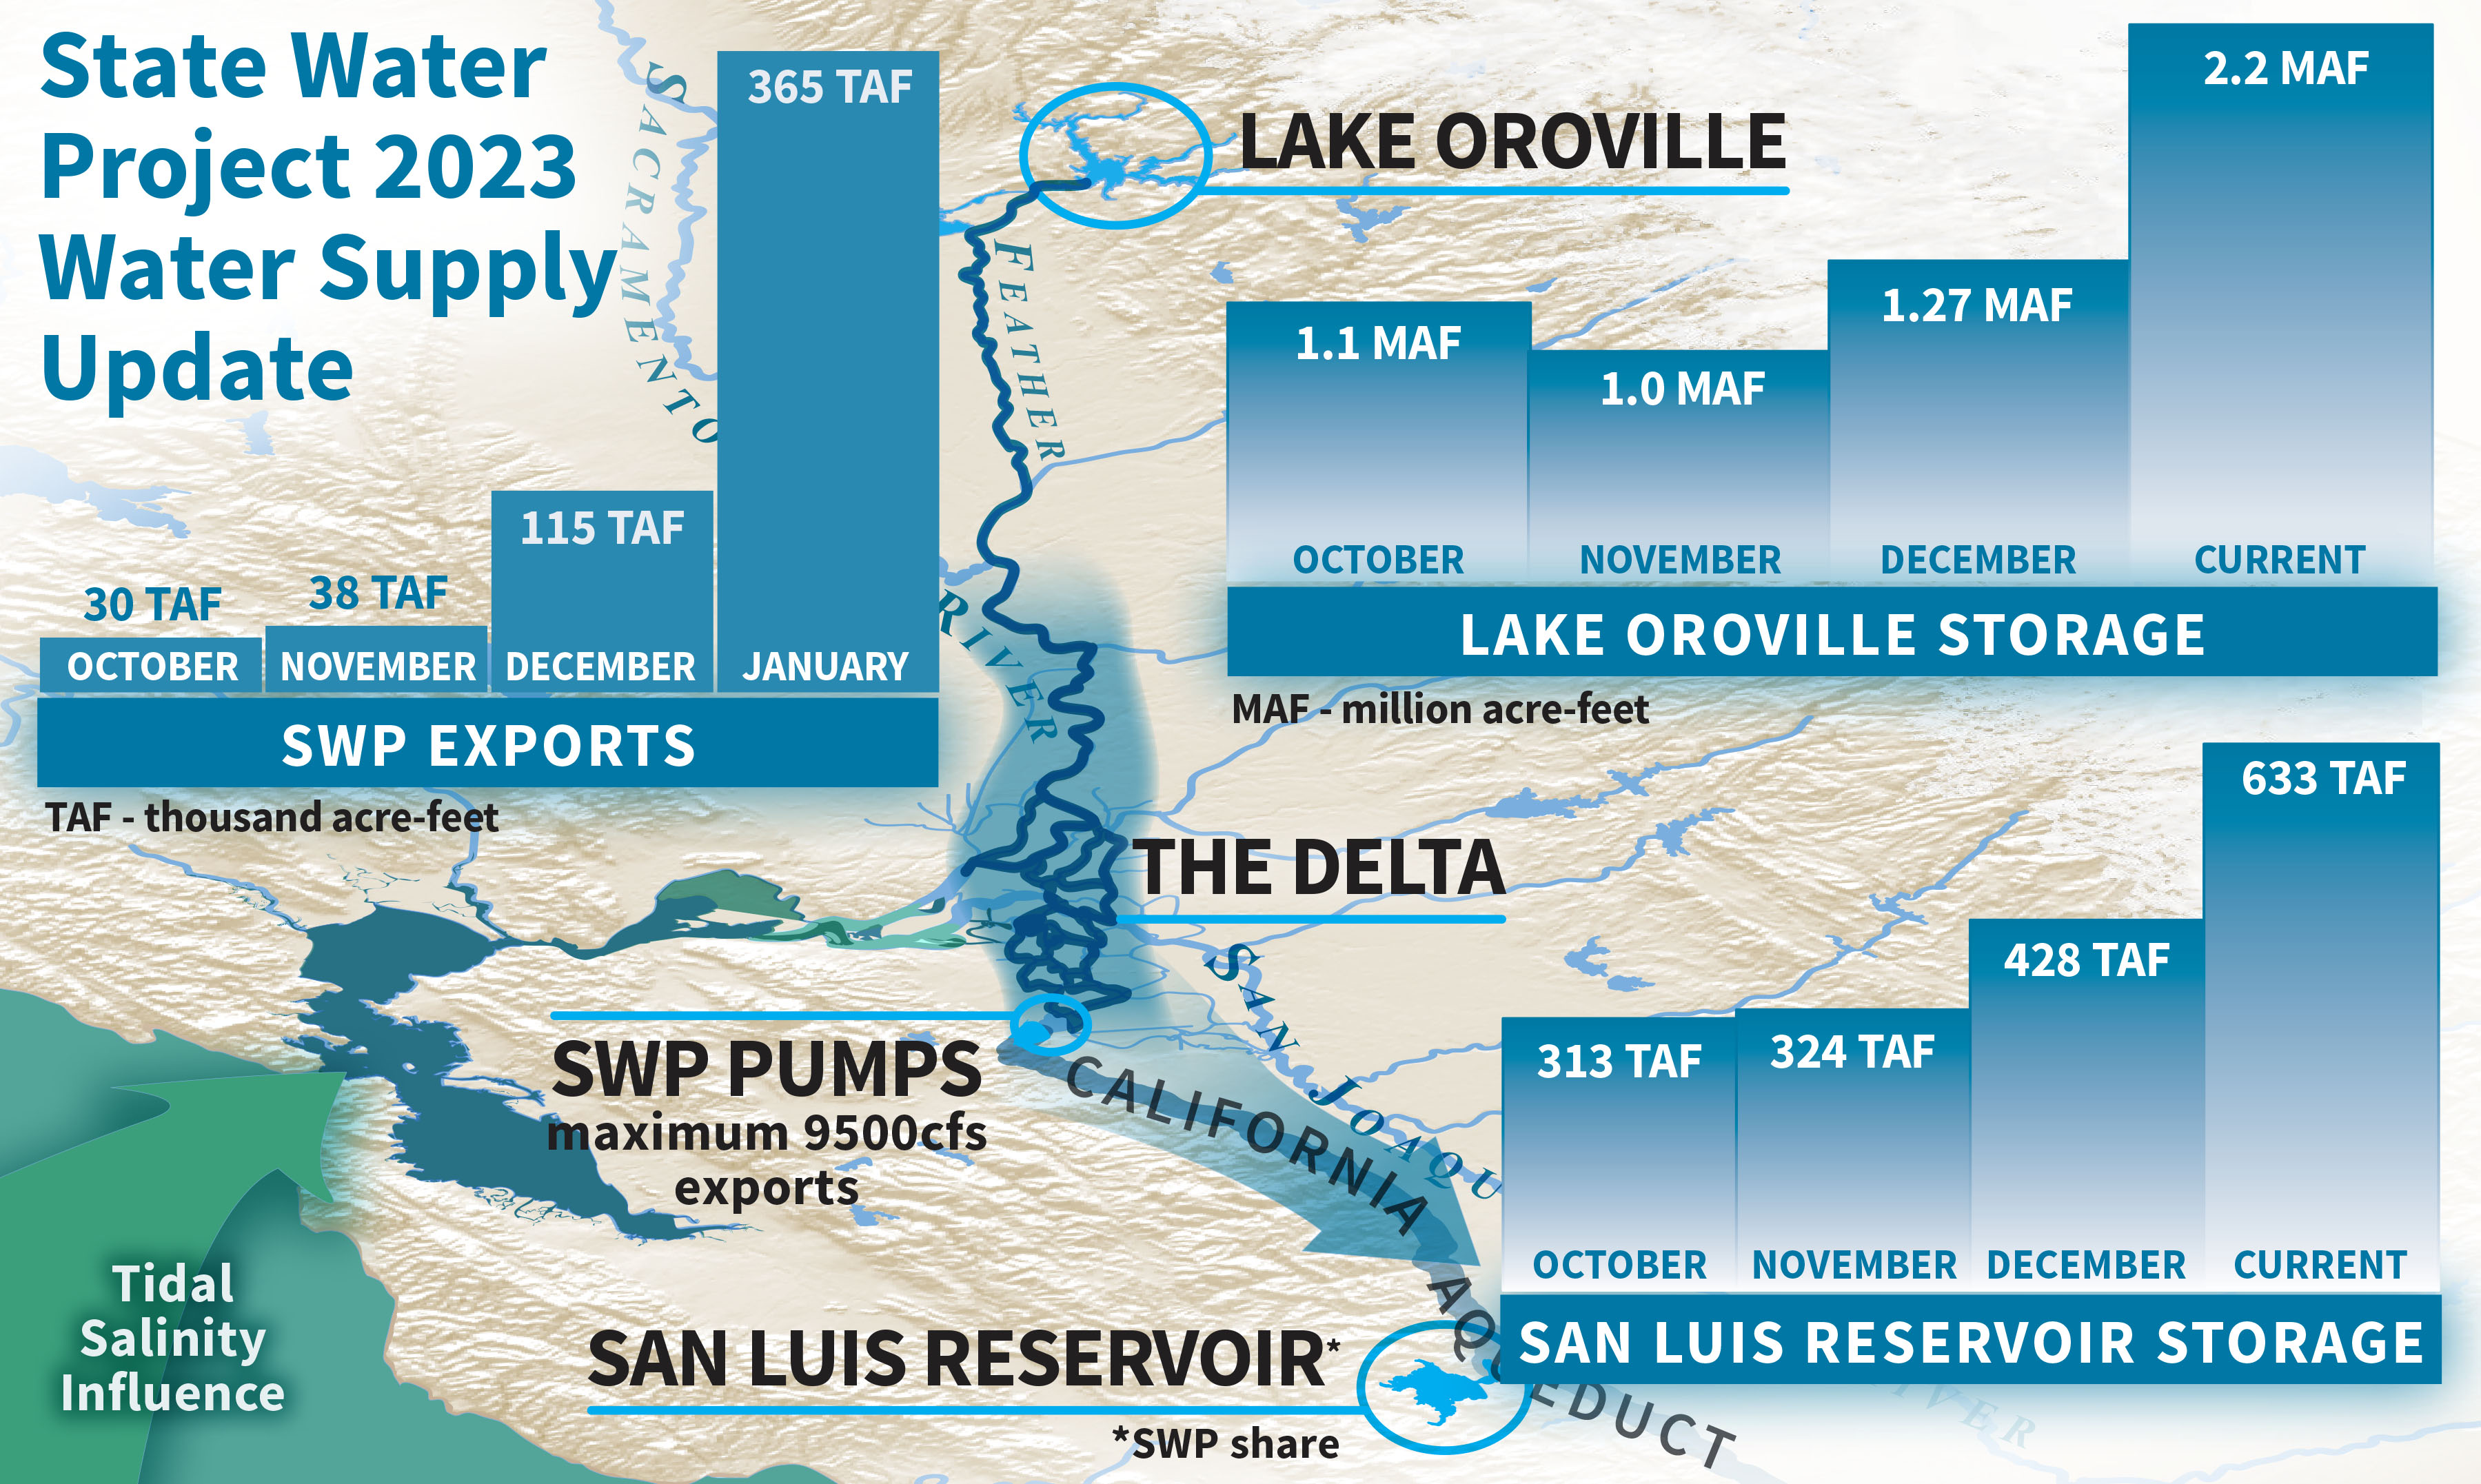 State Water Project 2023 Water Supply Update